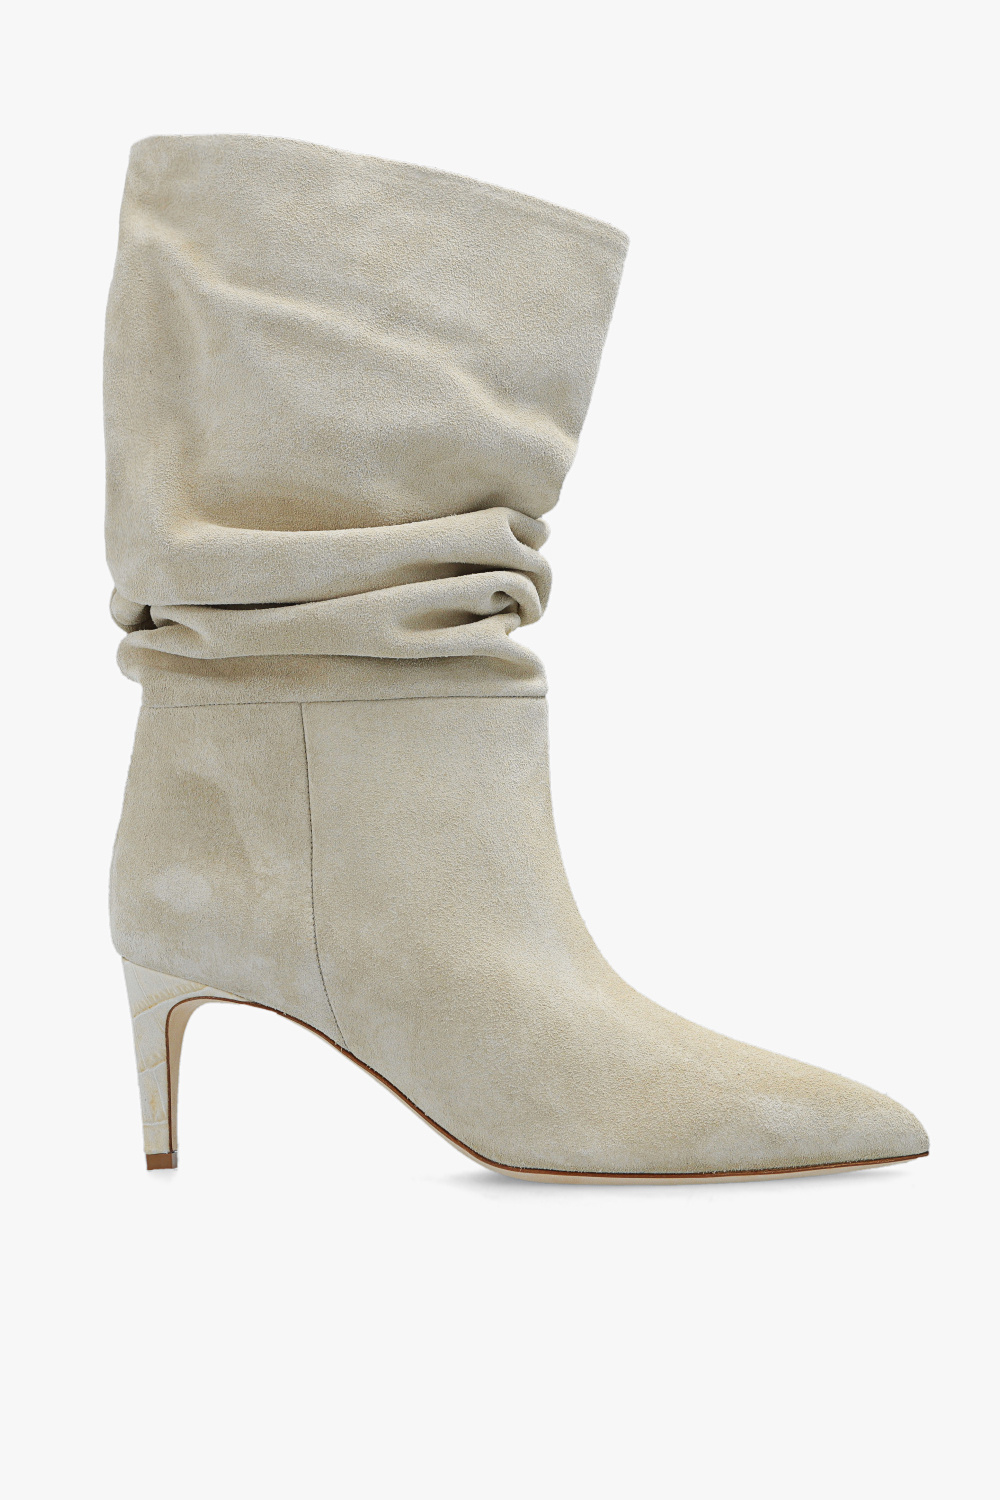 Paris Texas Suede heeled ankle boots